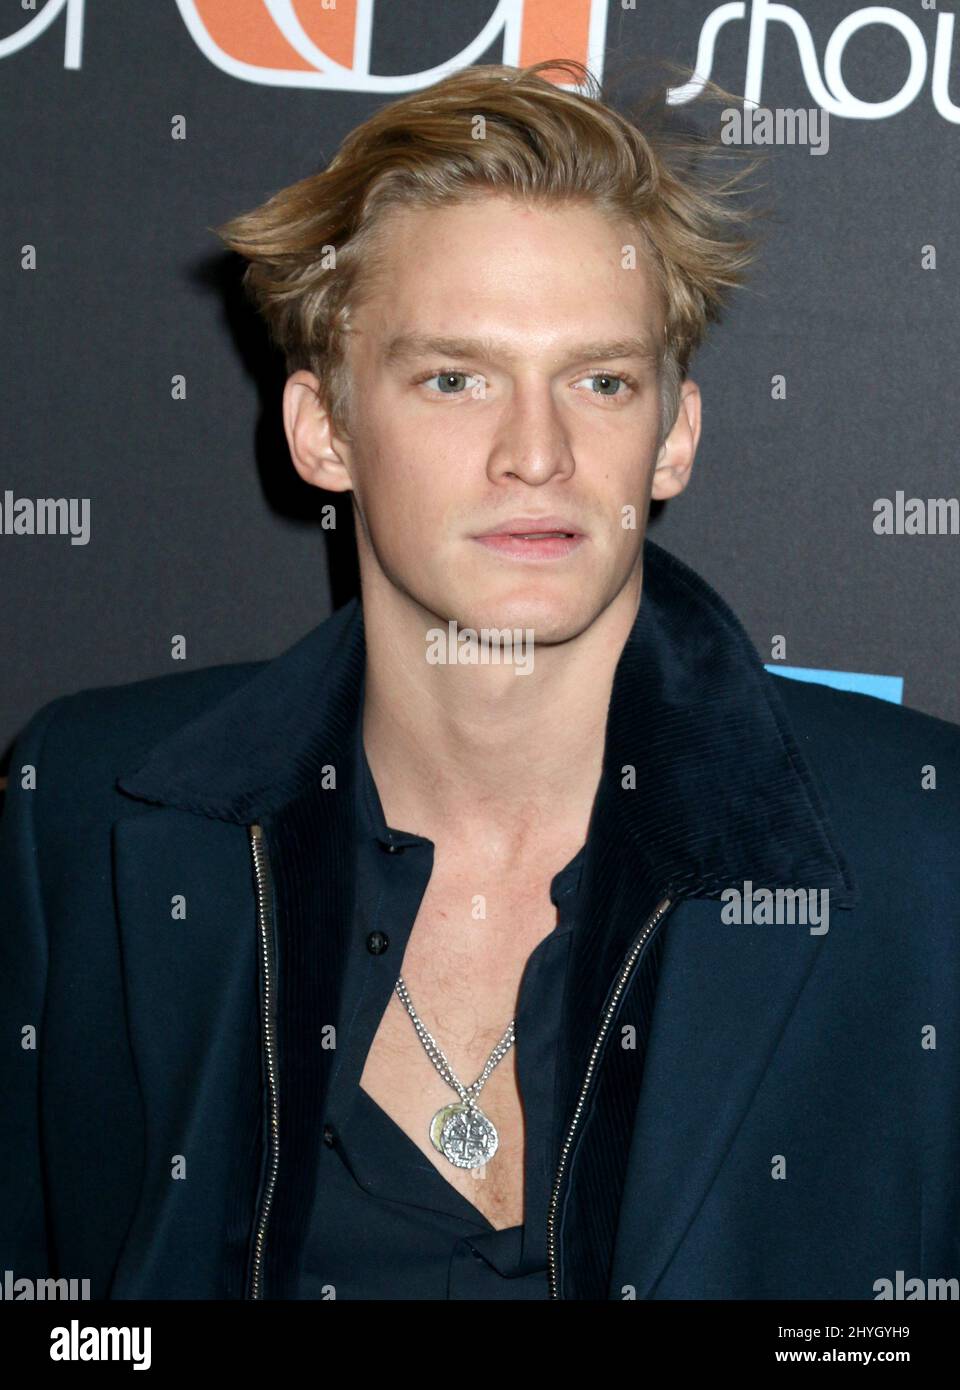 Cody Simpson attending 'The Cher Show' Broadway Opening Night Arrivals held at the Neil Simon Theatre on December 3, 2018 in New York City, NY Stock Photo